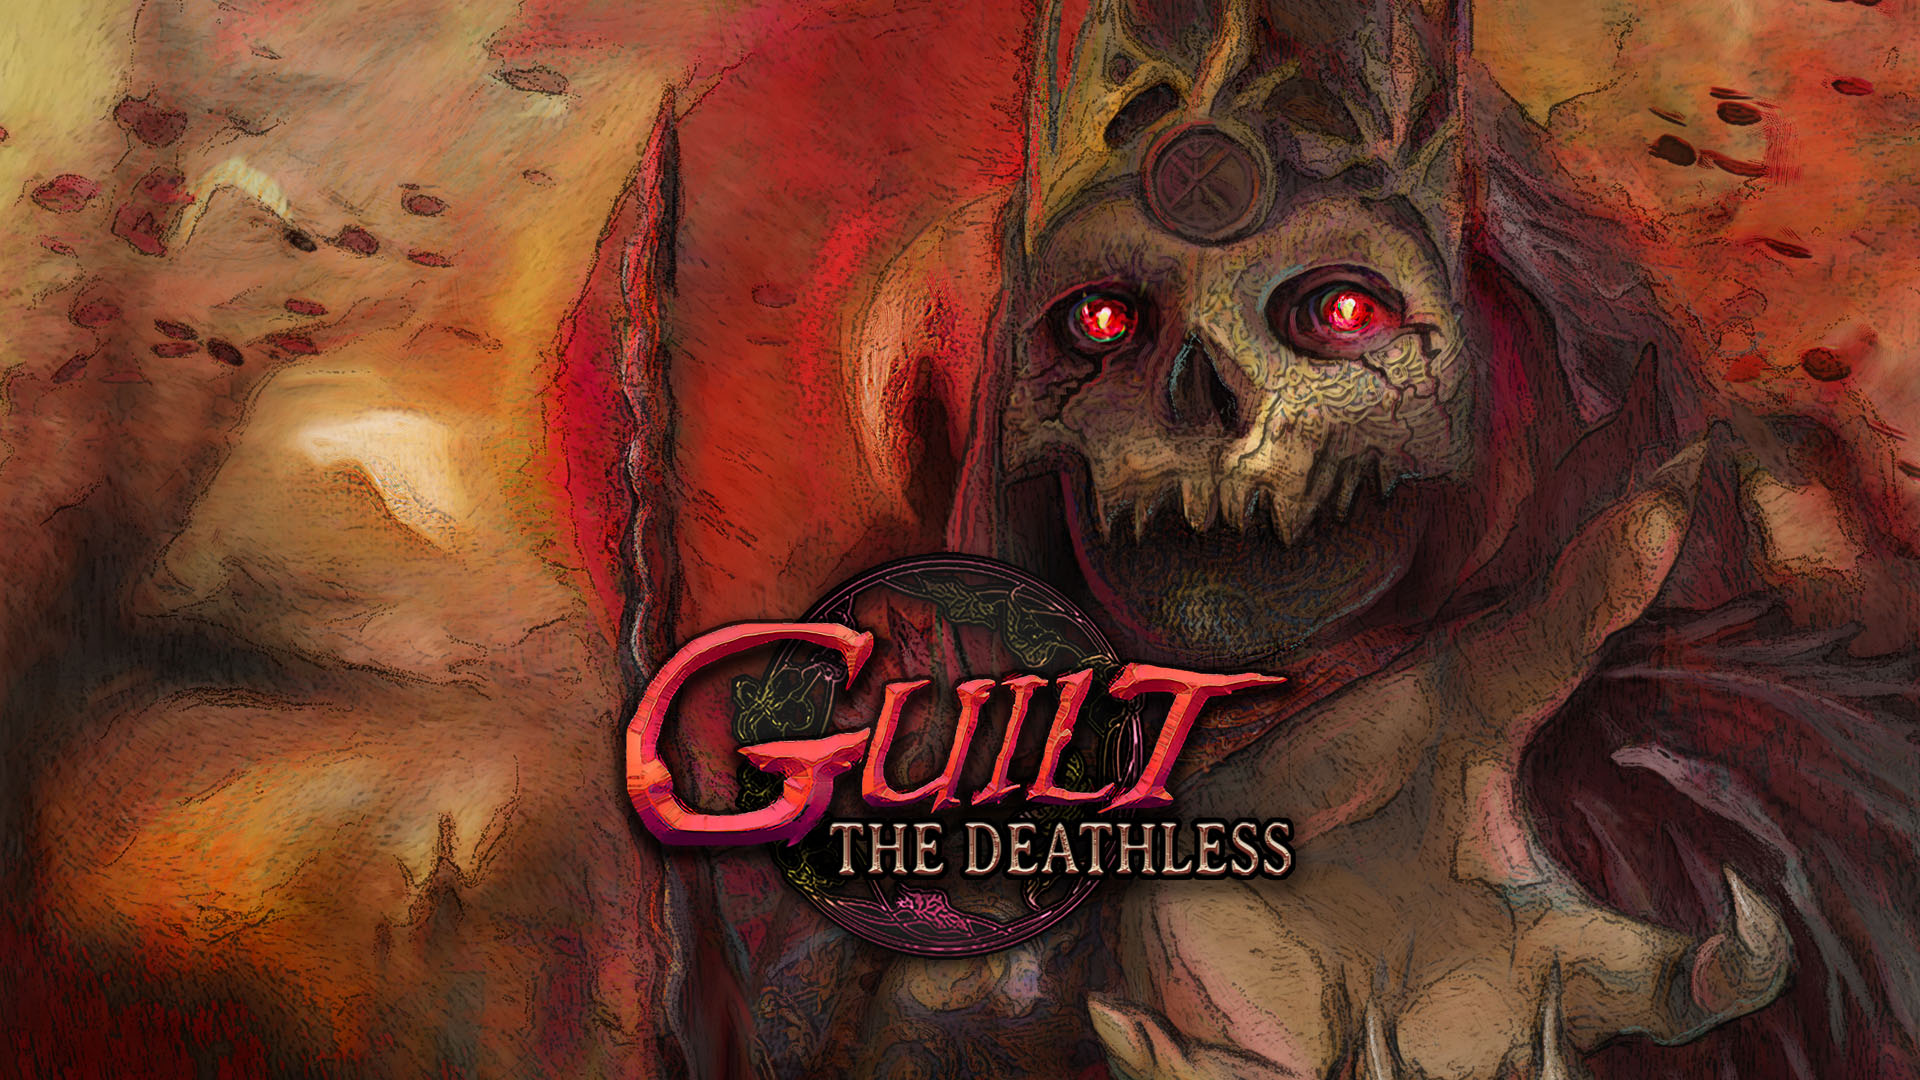 GUILT: The Deathless launches via early access